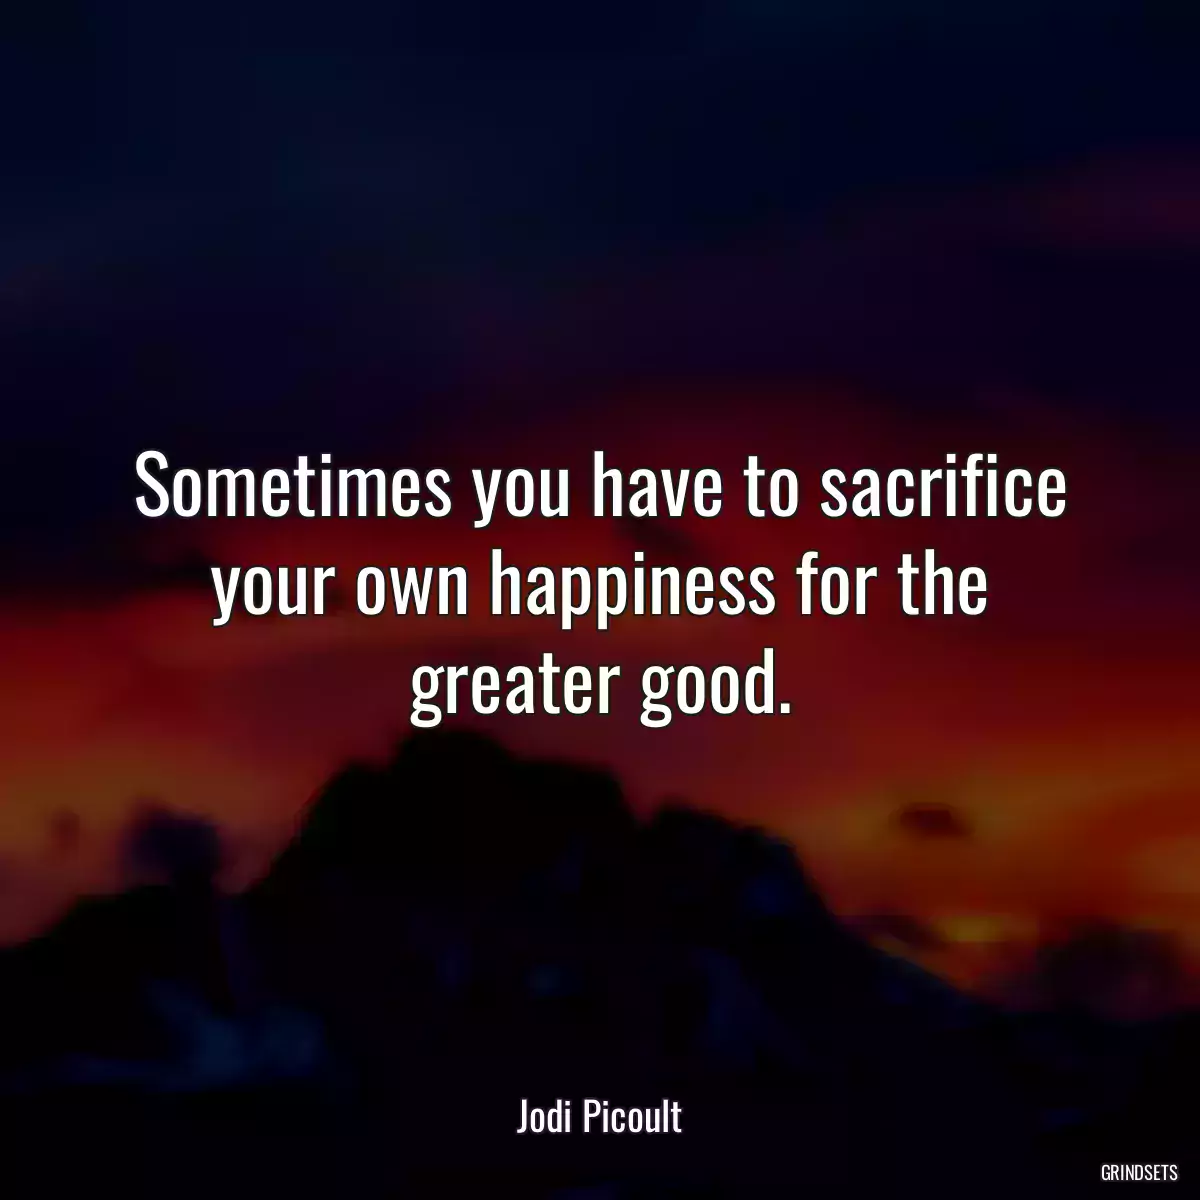 Sometimes you have to sacrifice your own happiness for the greater good.